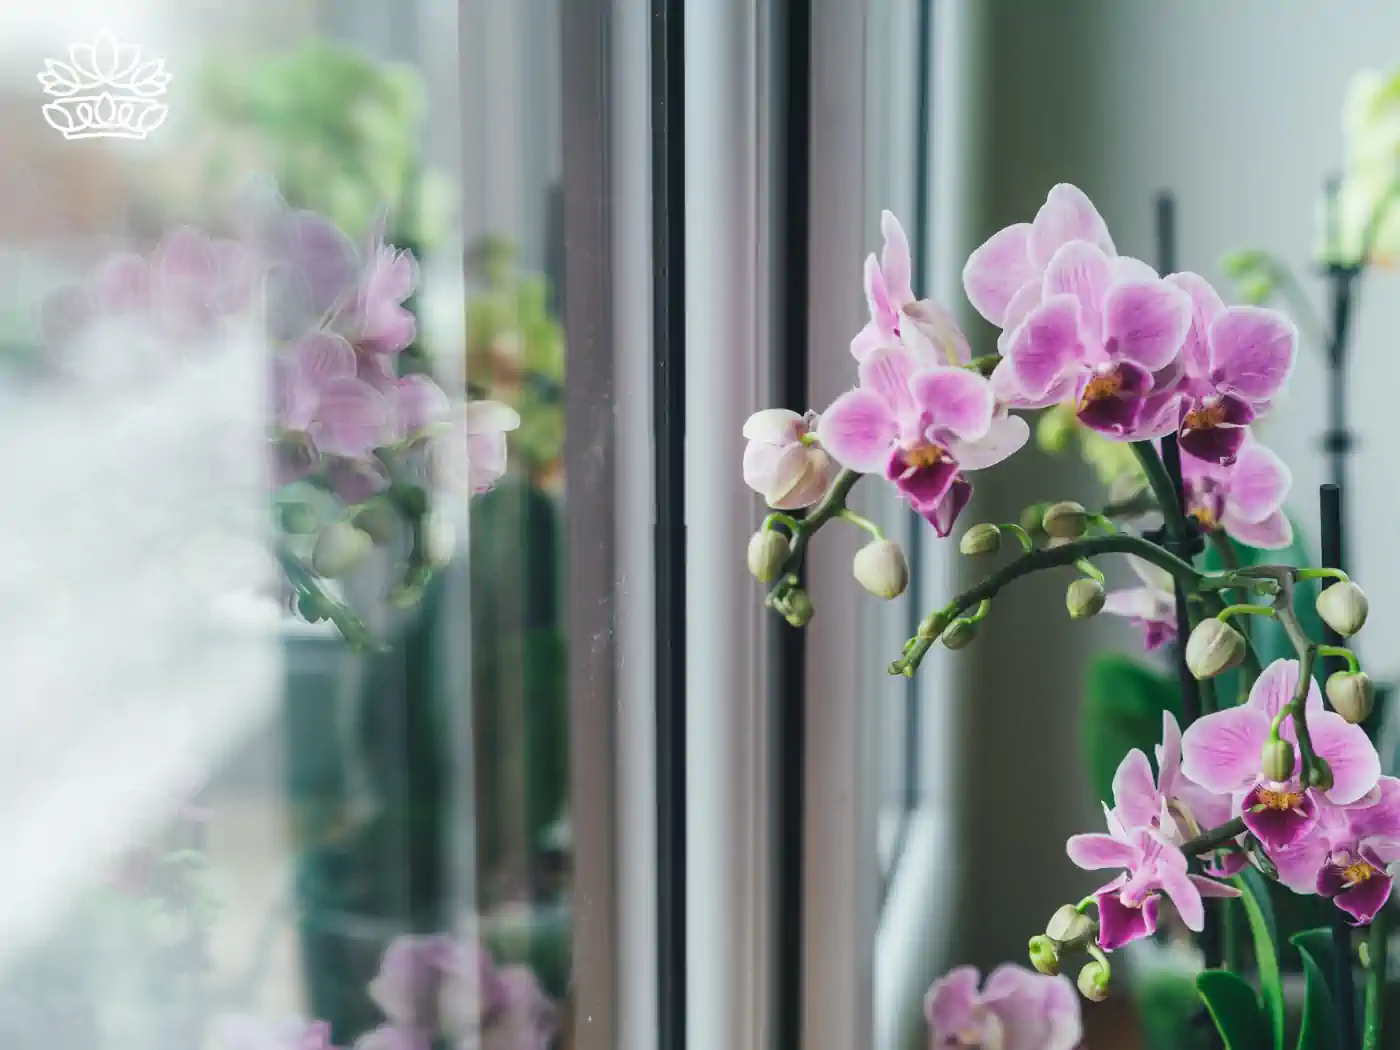 Close-up of pink orchids blooming near a window, reflecting on the glass. Fabulous Flowers and Gifts - Orchids Collection.